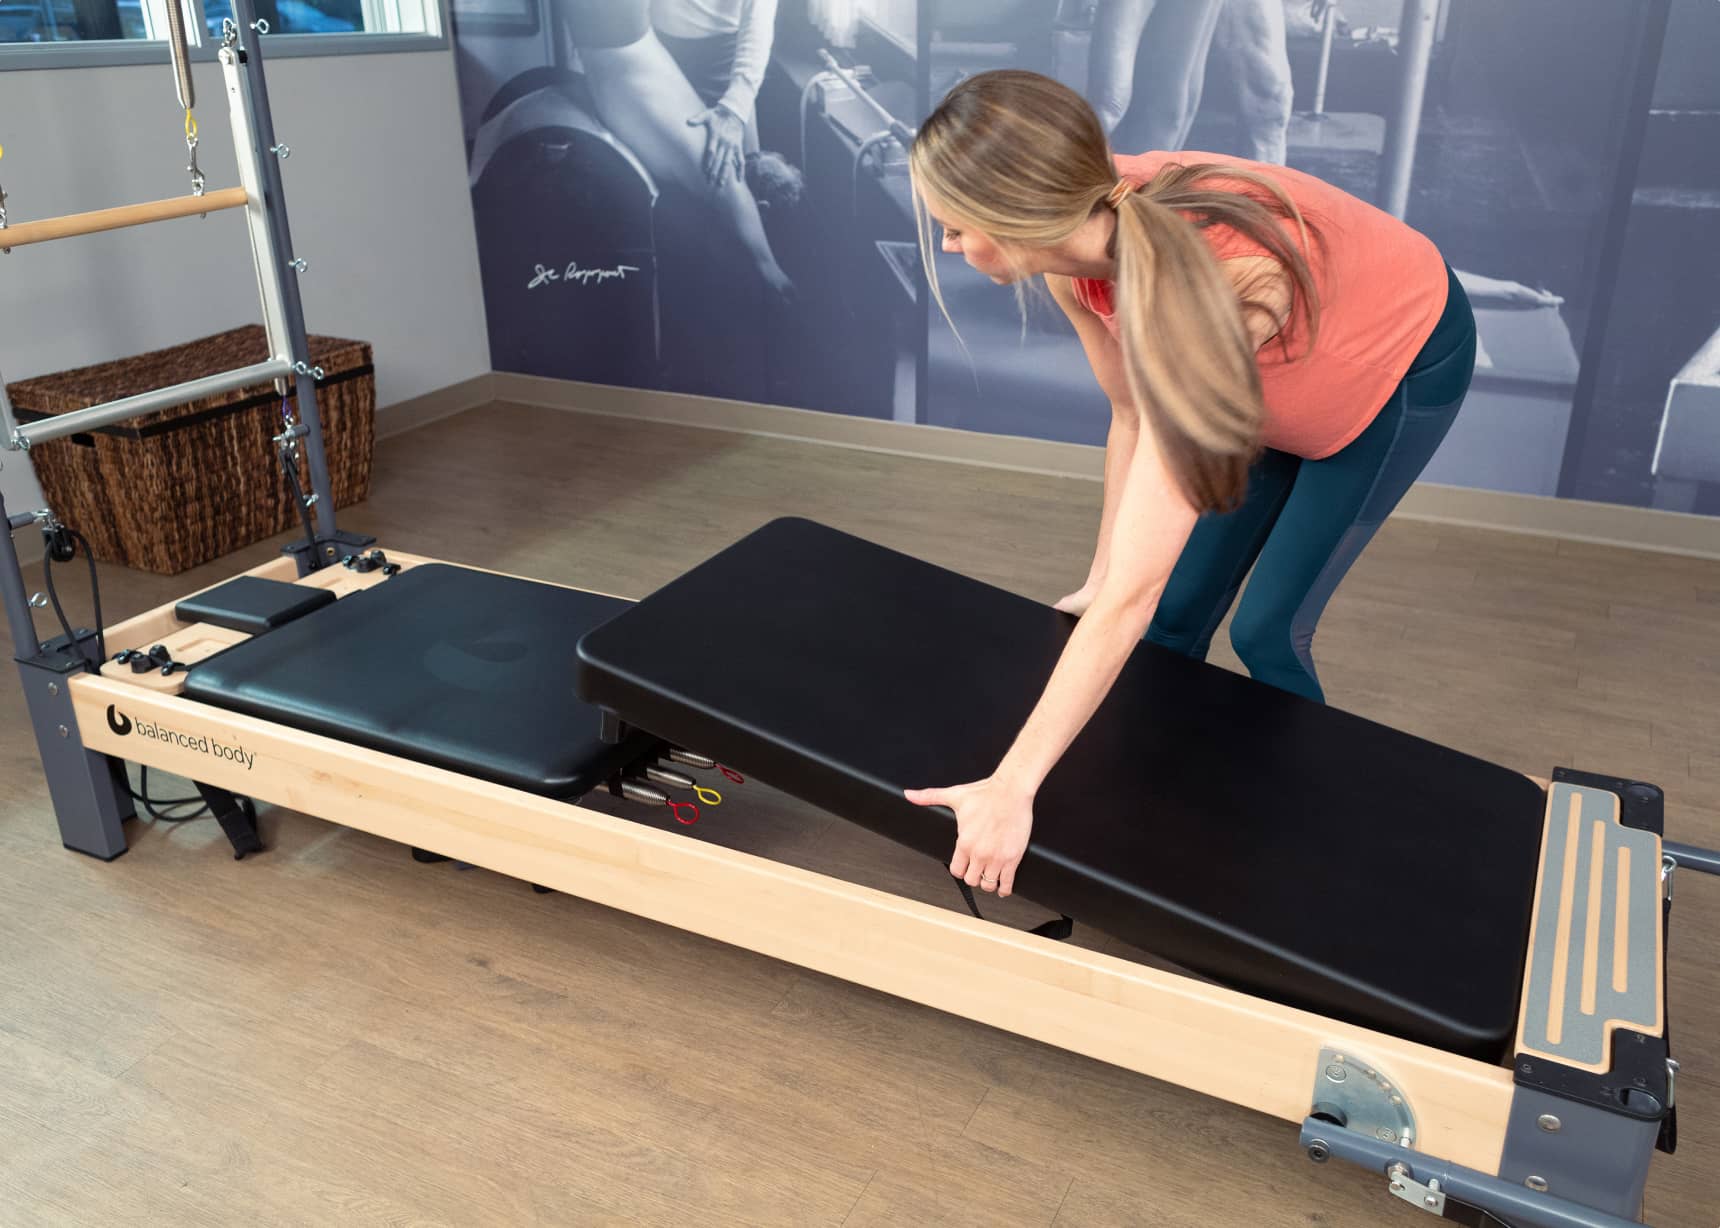 Pilates Reformer Accessories - Functional Integrated Trainer Kit